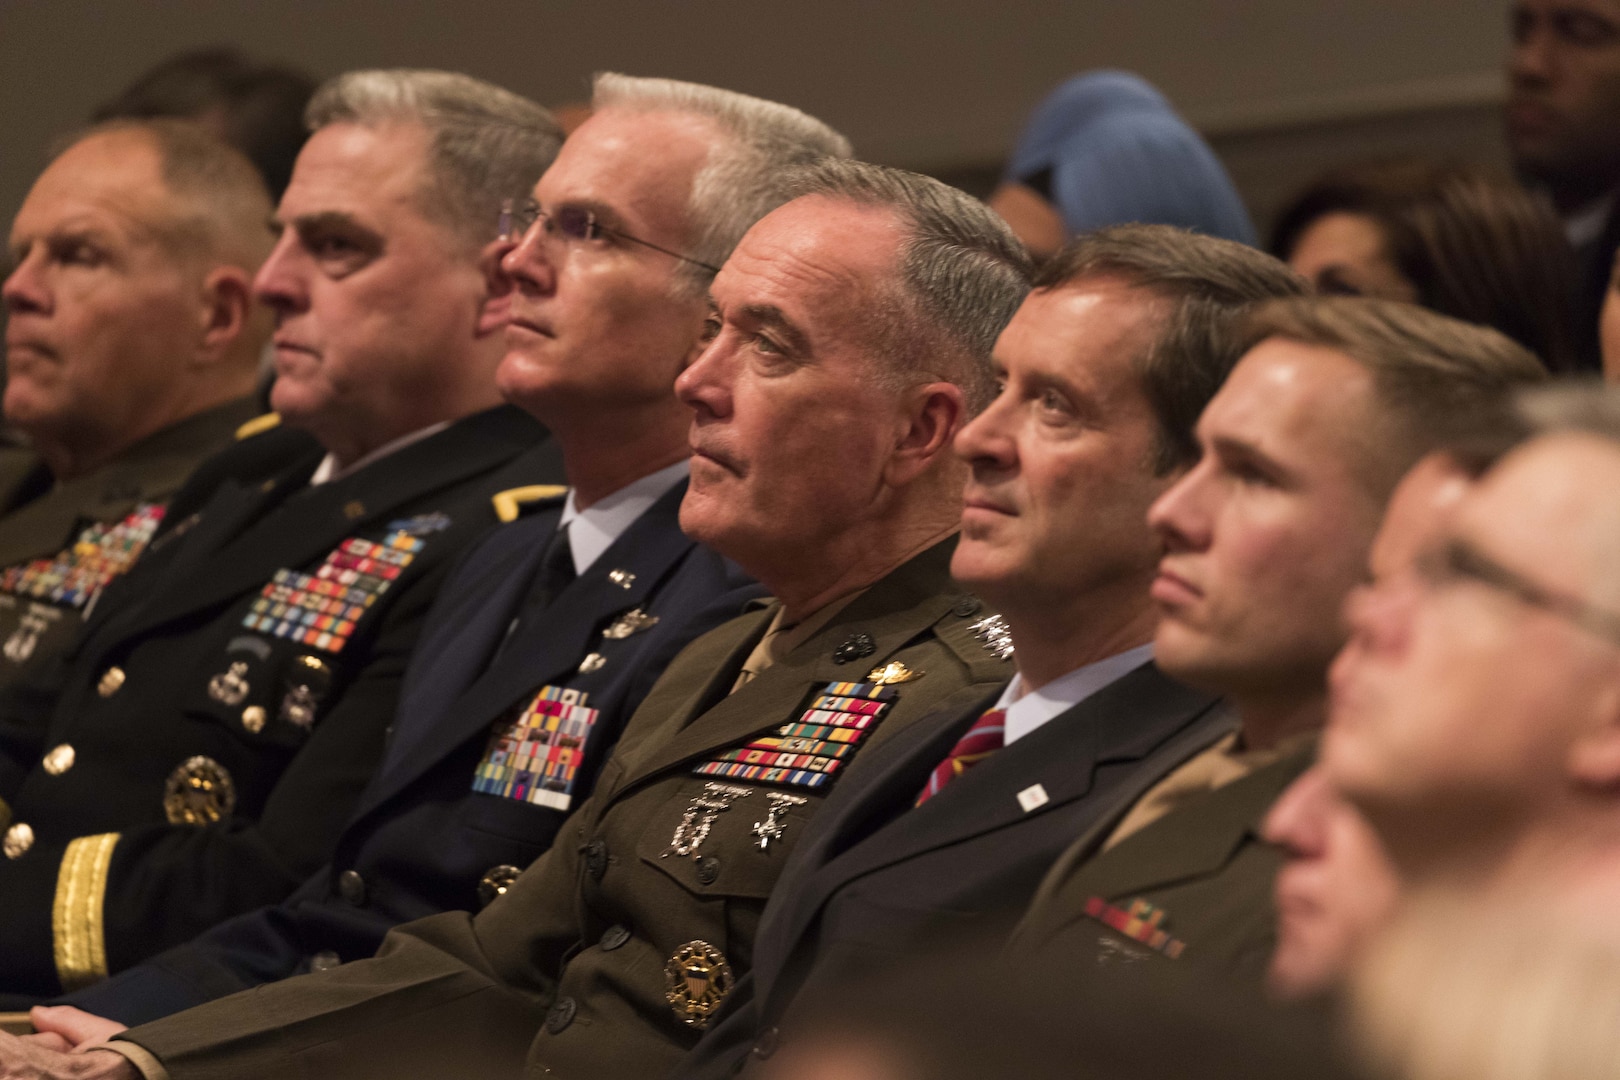 Chairman of the Joint Chiefs of Staff Marine Corps Gen. Joe Dunford, center, and members of the Joint Chiefs of Staff listen as President Donald J. Trump announces a new National Security Strategy, Dec. 18, 2017, at the Ronald Reagan Building and International Trade Center in Washington.